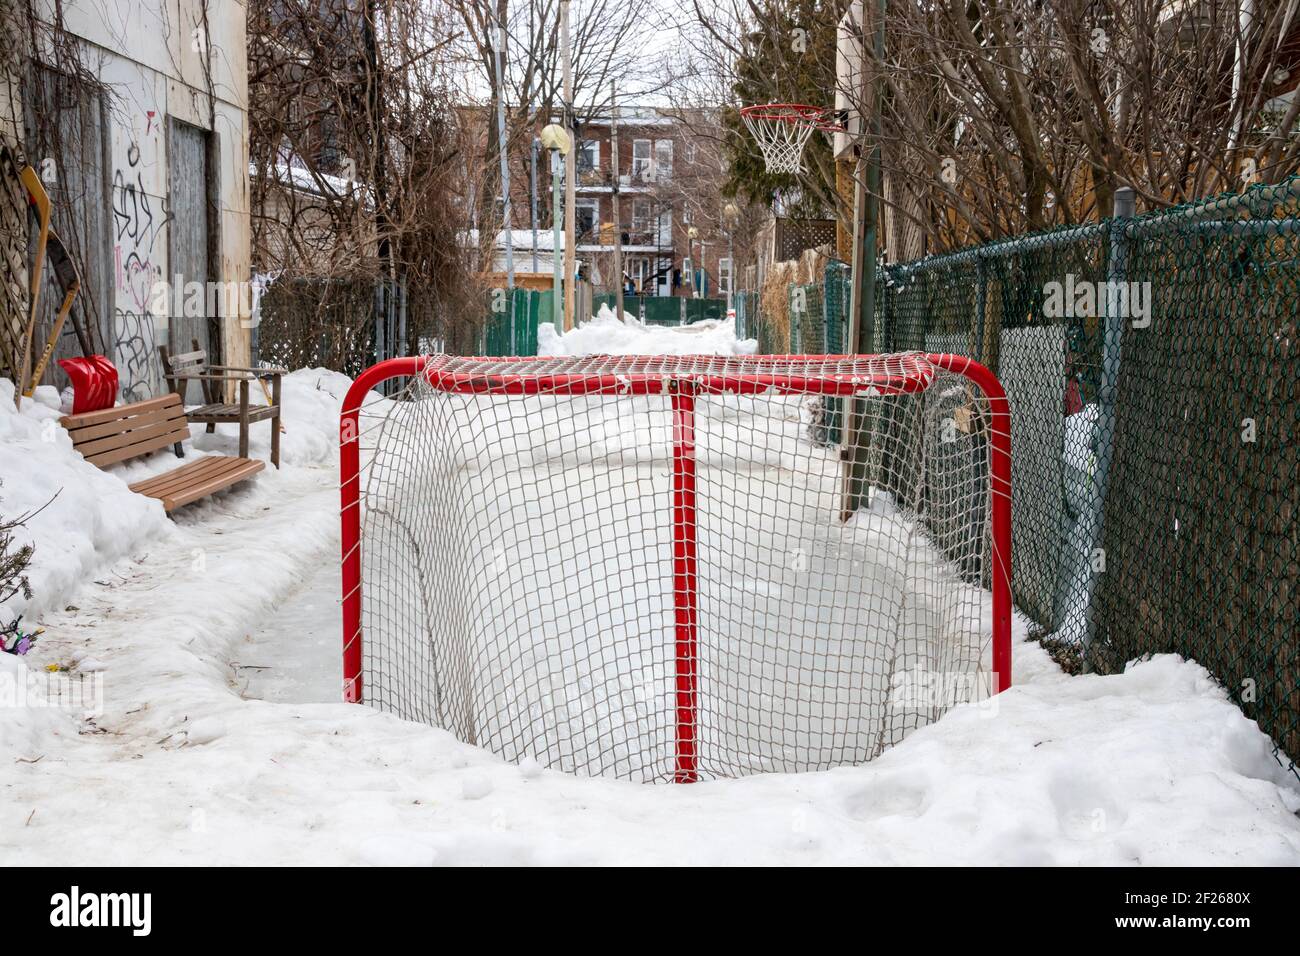 A Hockey goal and homemade small ice ring for kids in a Montreal alley, family neighbors shared game space, local culture Stock Photo